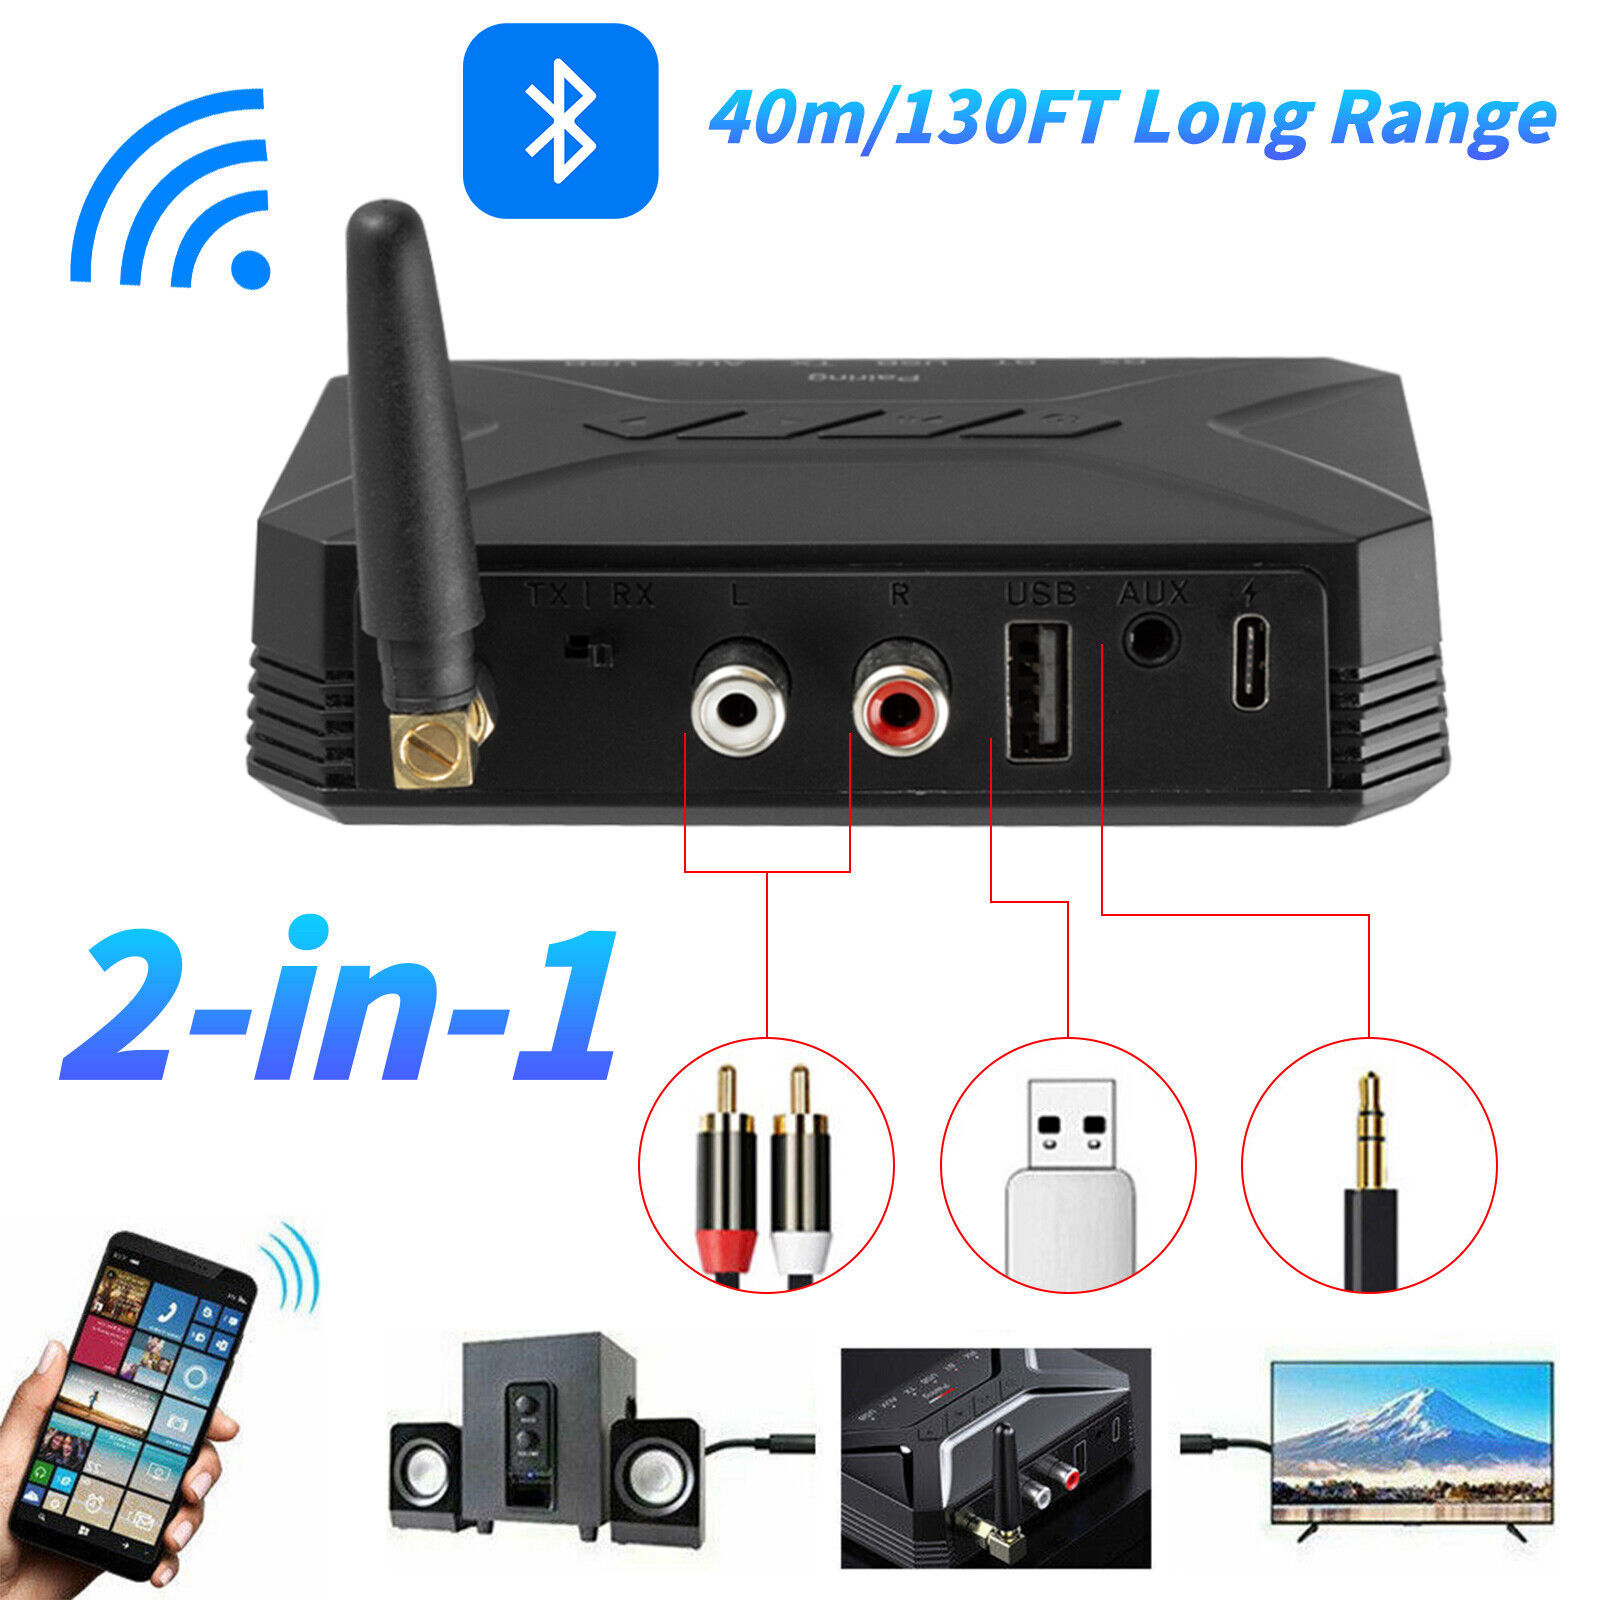 Long Range Bluetooth Transmitter Receiver For TV Home Car Stereo Audio Adapter